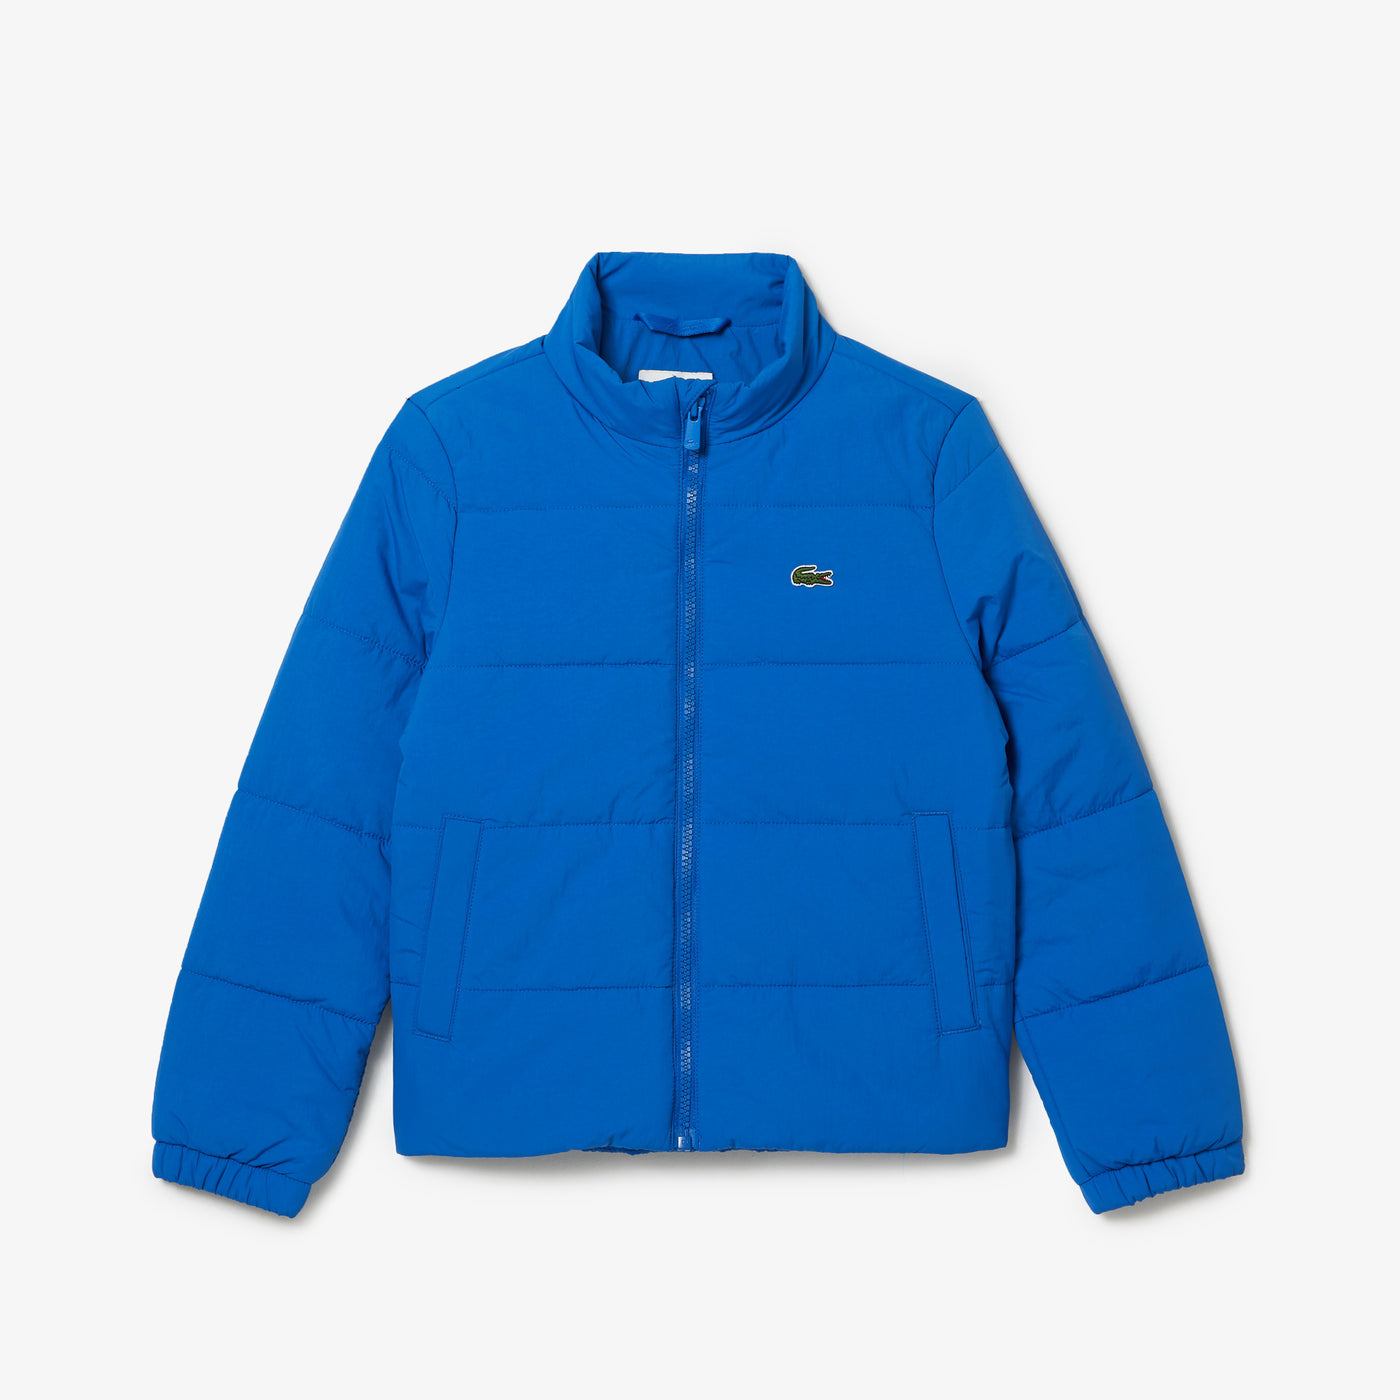 Shop The Latest Collection Of Lacoste Kids' Lacoste Puffed Jacket - Bj9736 In Lebanon